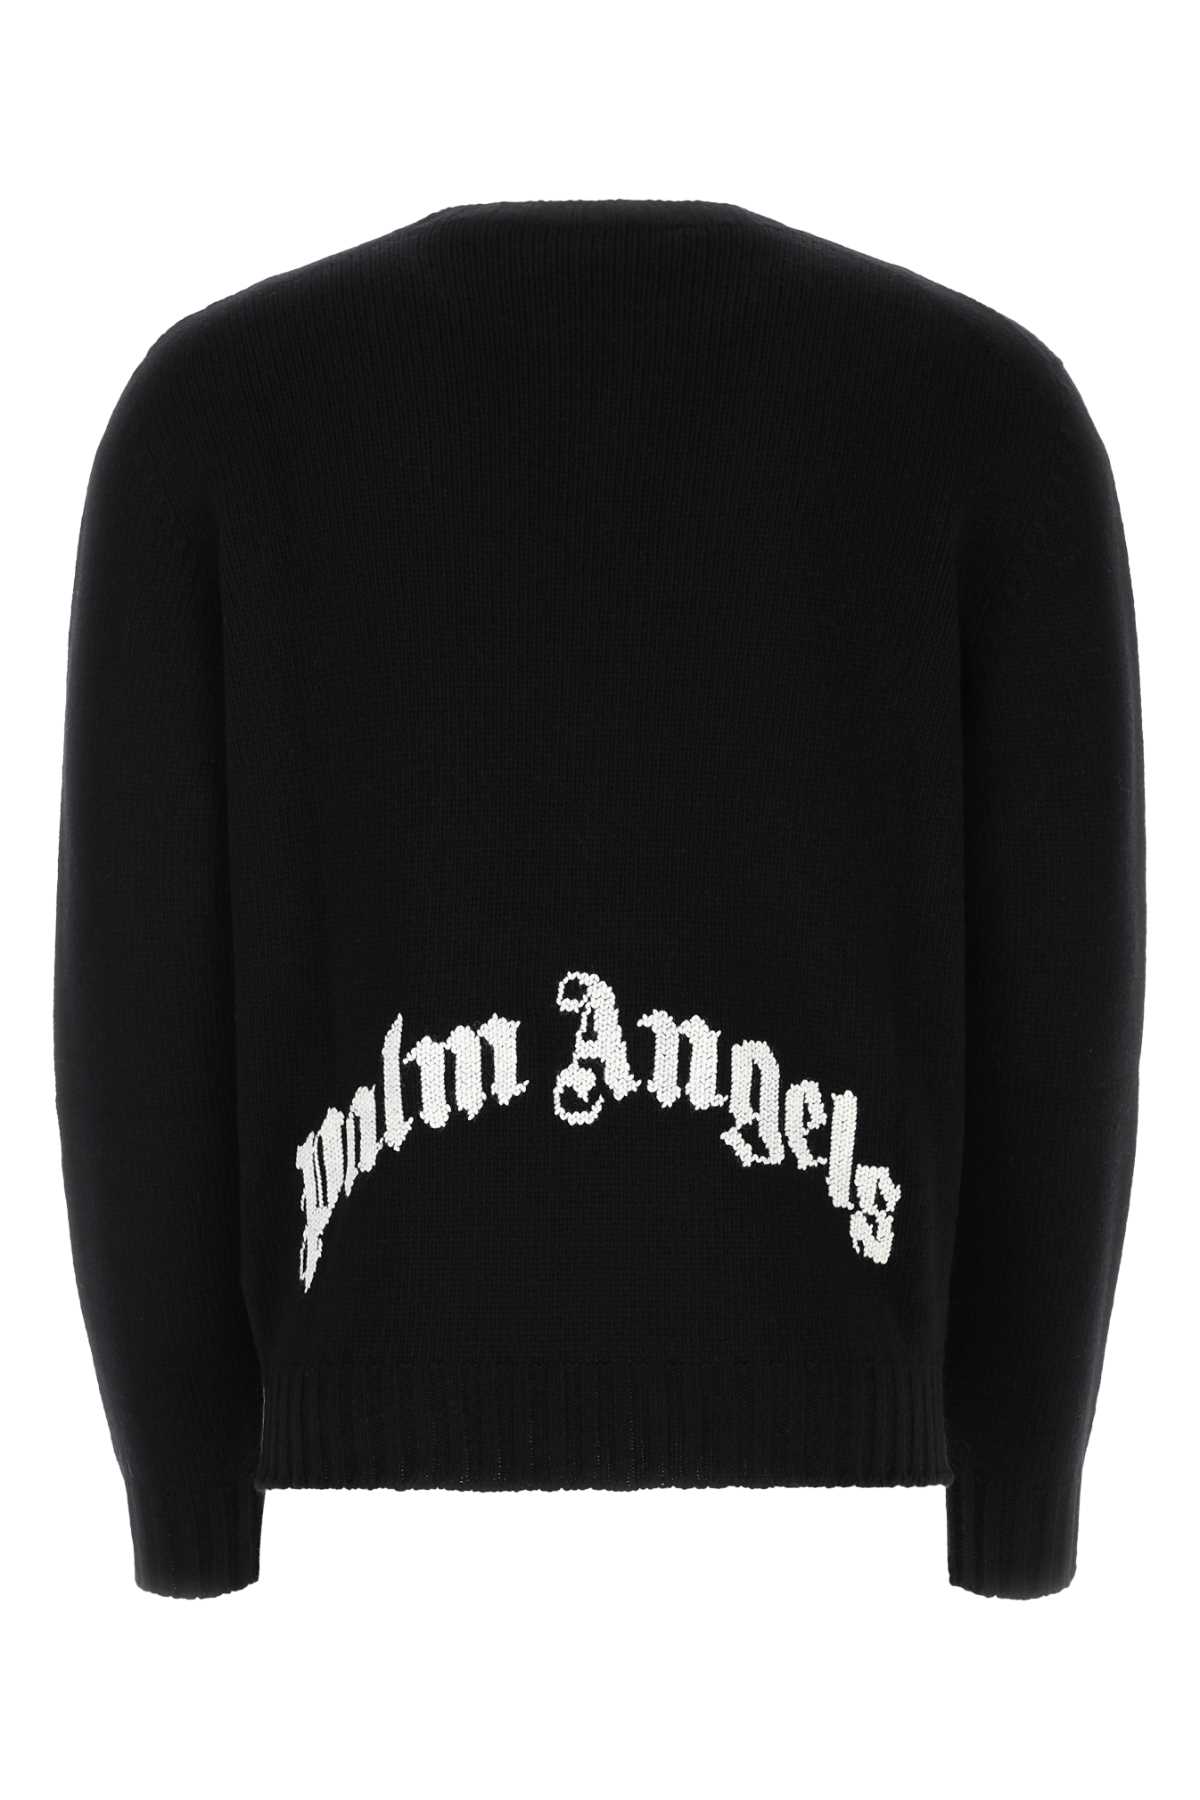 Palm Angels Black Wool Blend Sweater In 1001